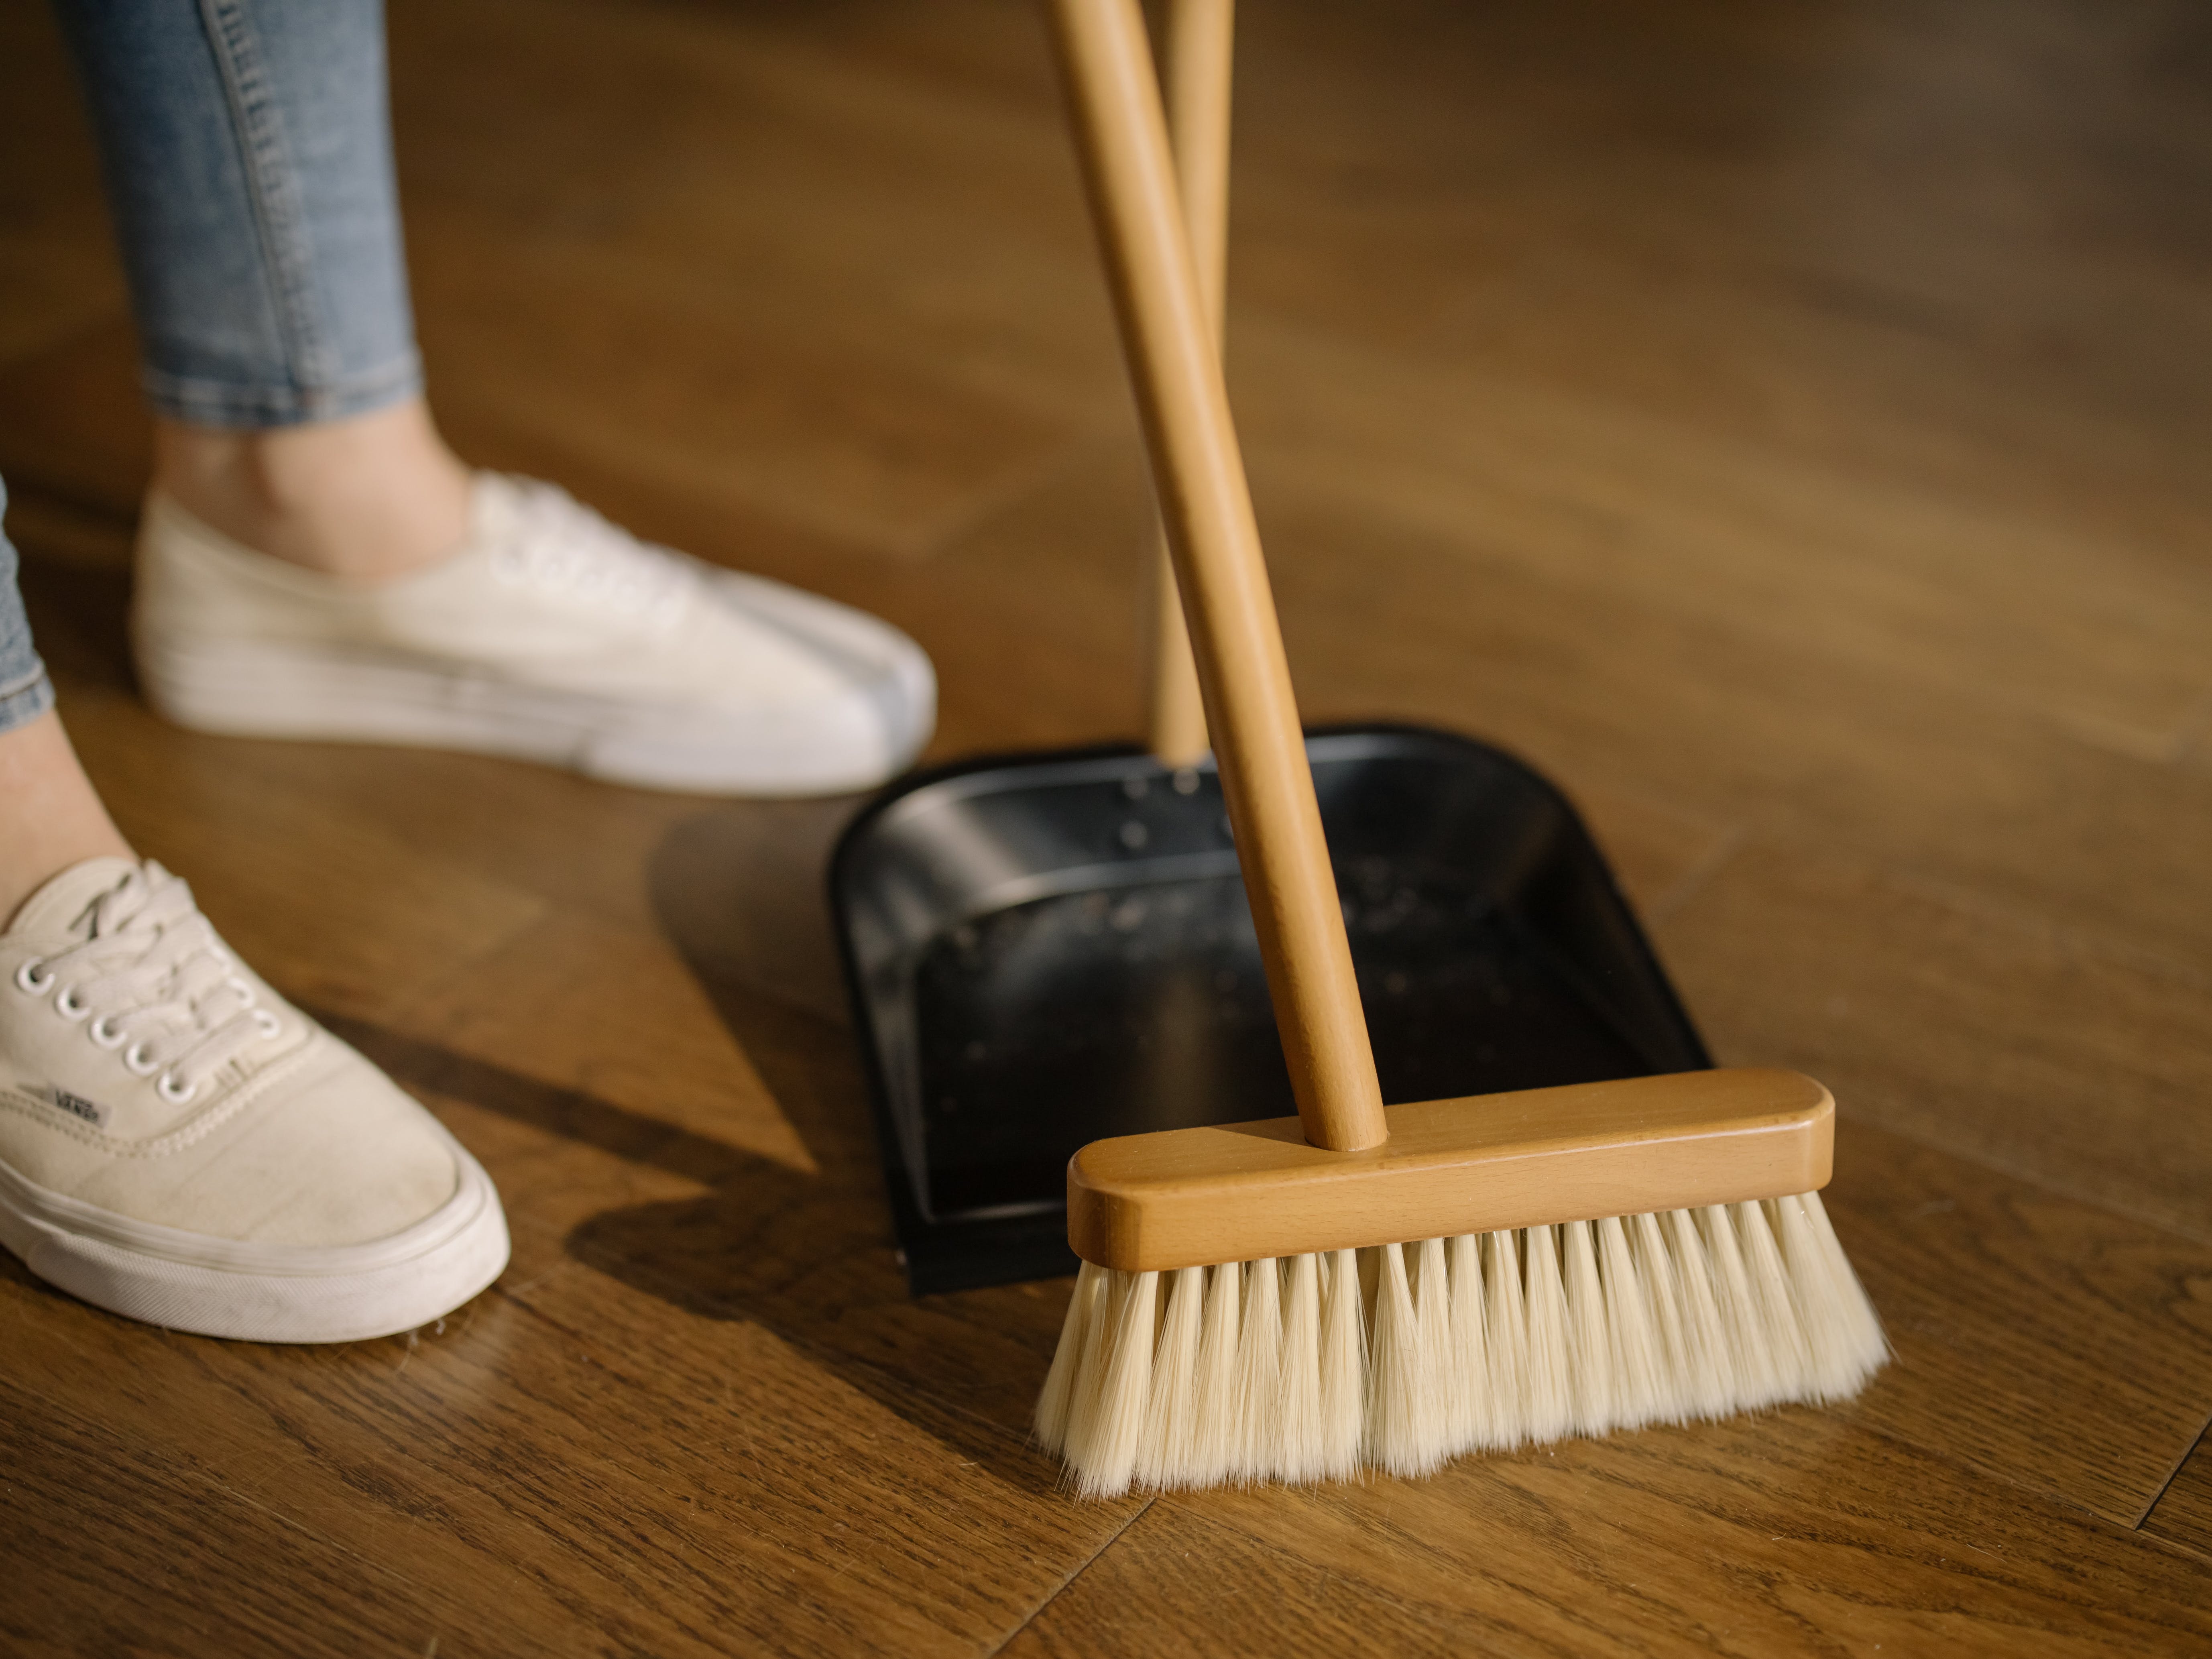 Someone sweeping up dirt with a broom and dustpan | Source: Pexels